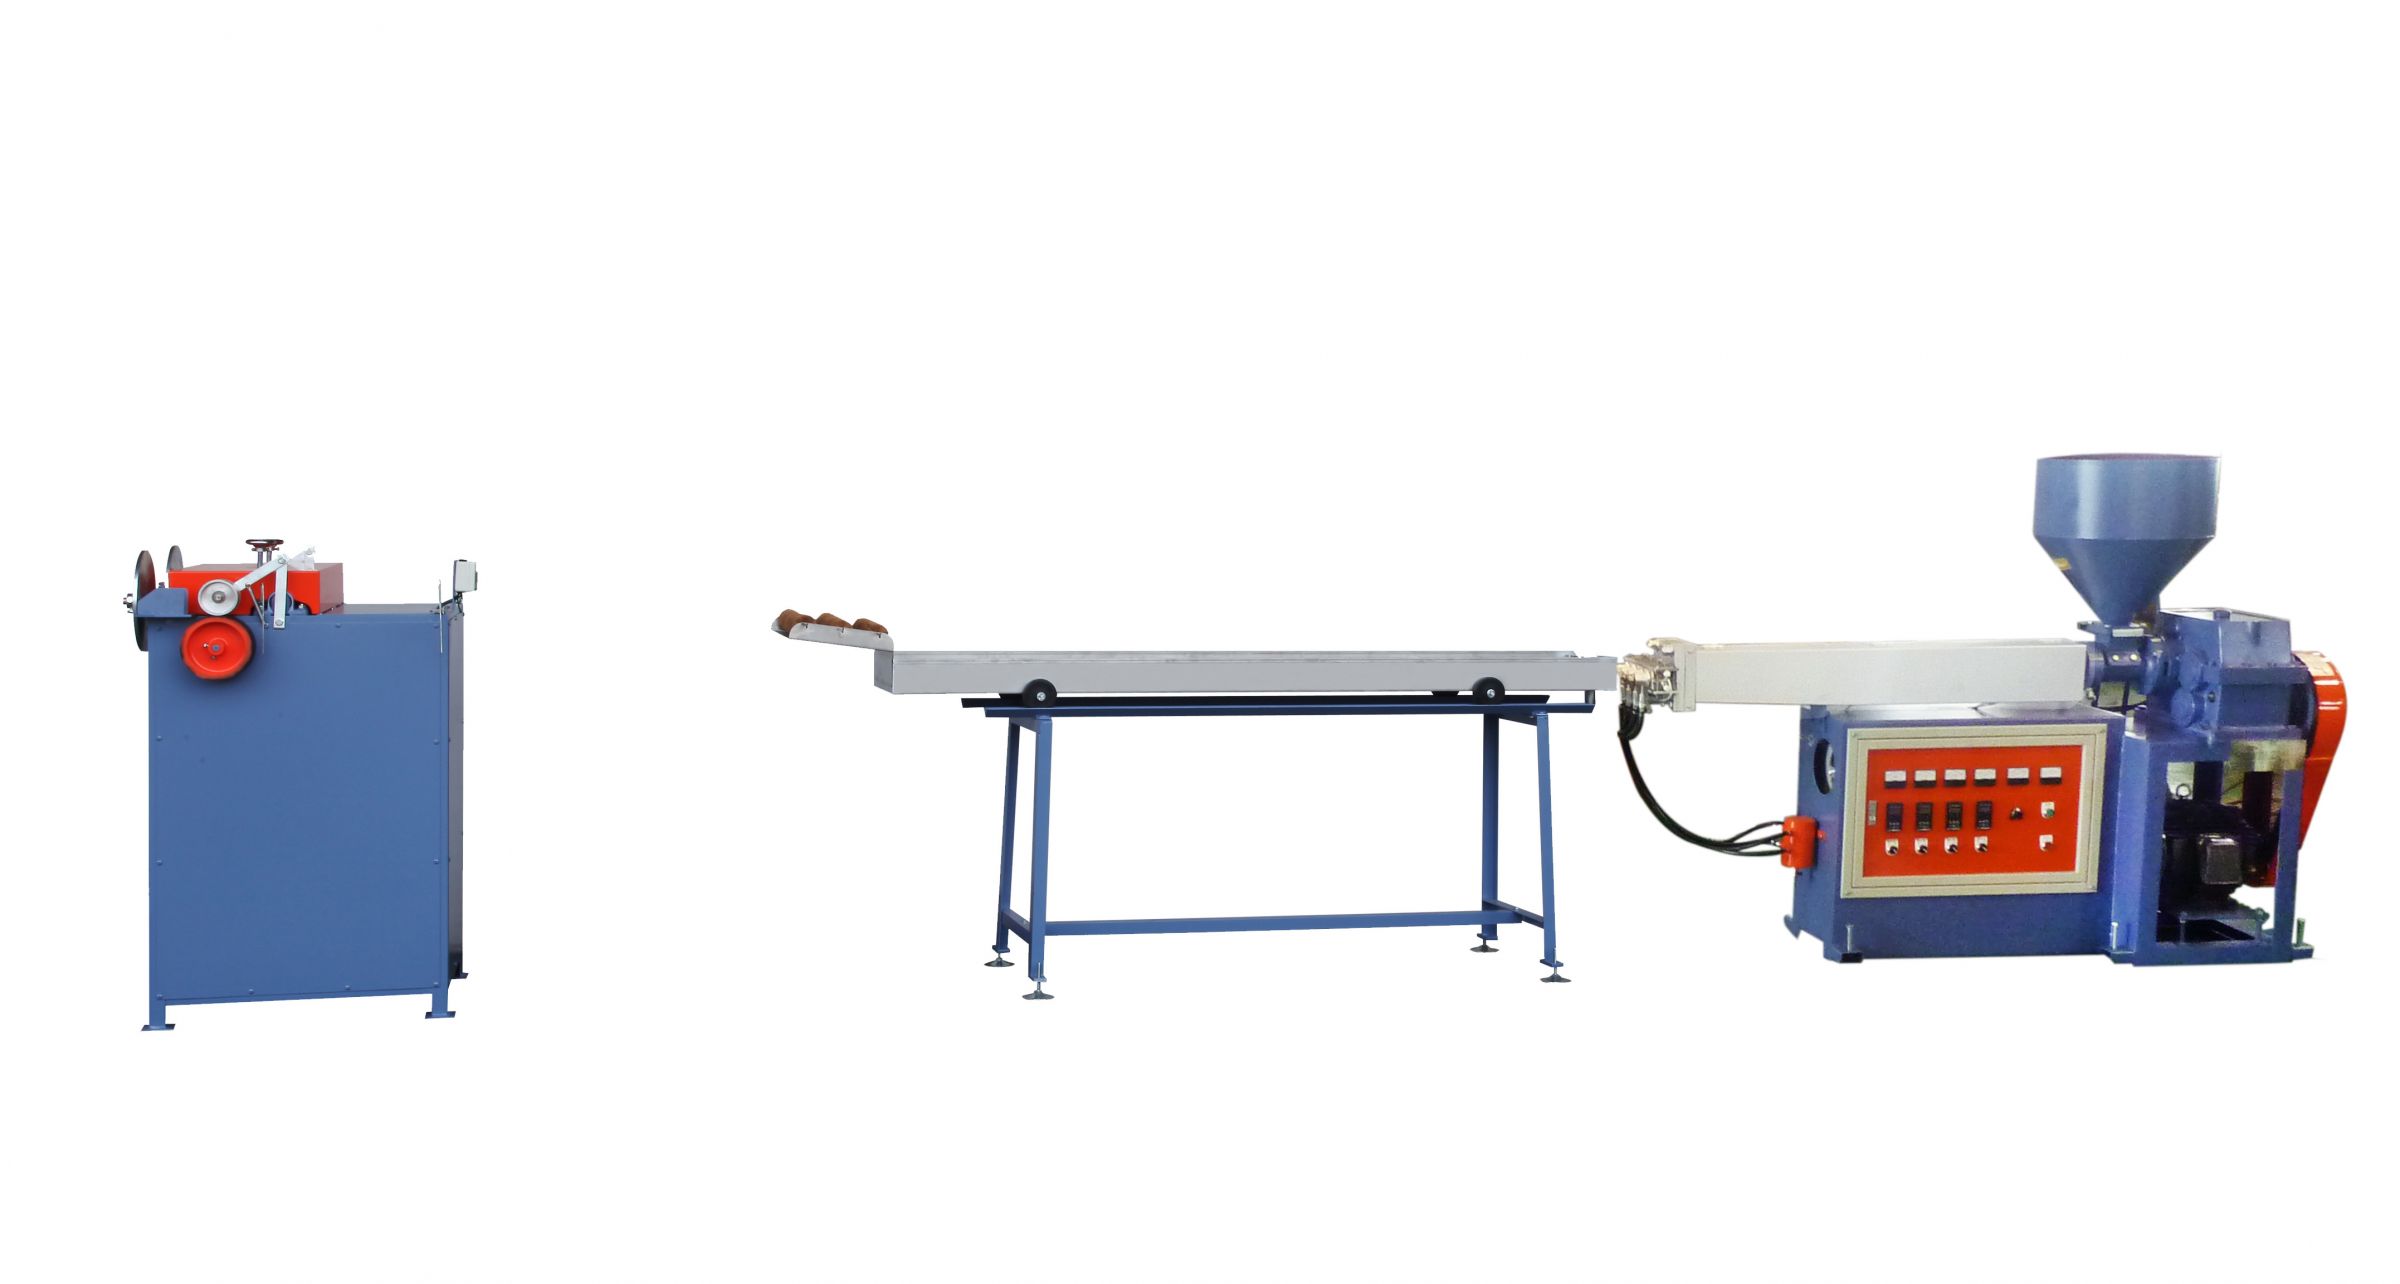 PP Straw Extruding Machine, with Water Colling Tank and Cutter, Model: V-TY-65M